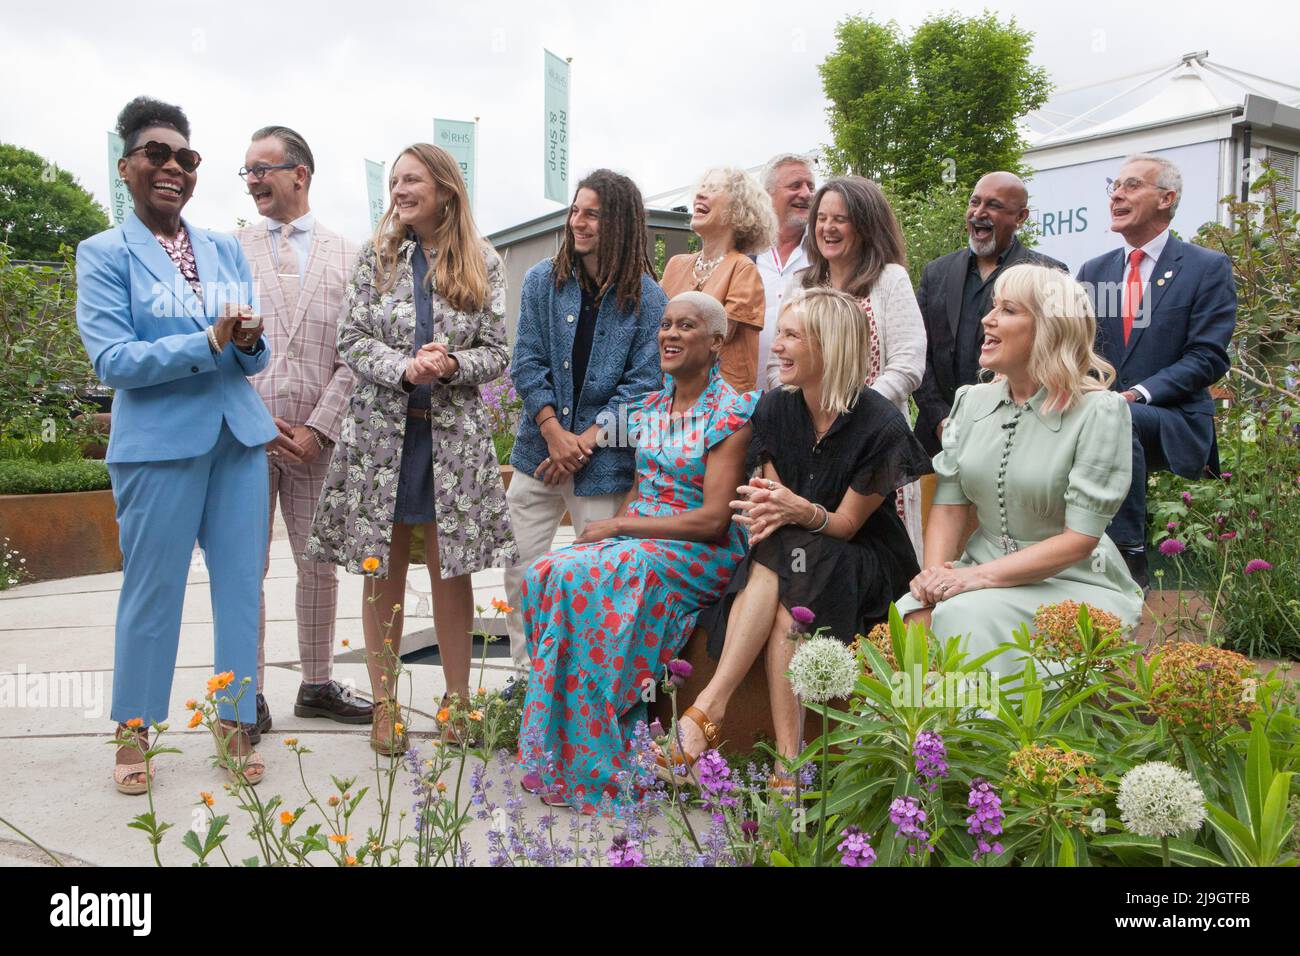 London, UK, 23 May 2022: Outgoing RHS ambassador Flowella BNenjamin, left, addresses the ten new ambassadors announced at Chelsea Flower Show, including Simon Lycett, Kate Bradbury, Tayshan Hayden Smith, Sue Kent, Mark Gregory, incoming RHS president Clare Matterson, Manoj Malde, James Alexander-Sinclair and seated Arit Anderson,  Jo Wiley and Nicki Chapman.  Anna Watson/Alamy Live News Stock Photo